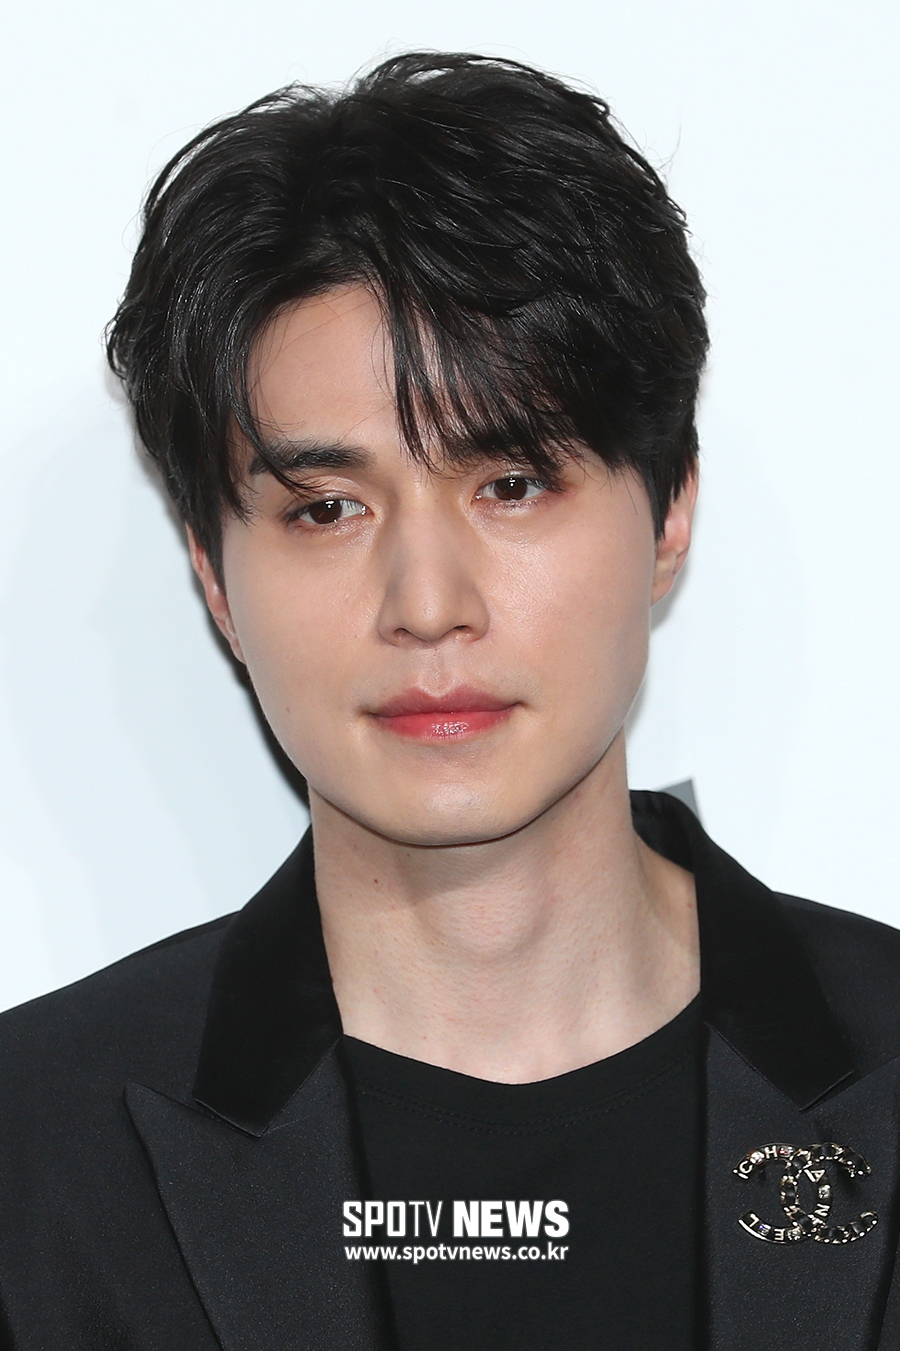 Actor Lee Dong-wook poses at the launching photo wall event held at a store in Sinsa-dong, Gangnam-gu, Seoul on the afternoon of the 8th.